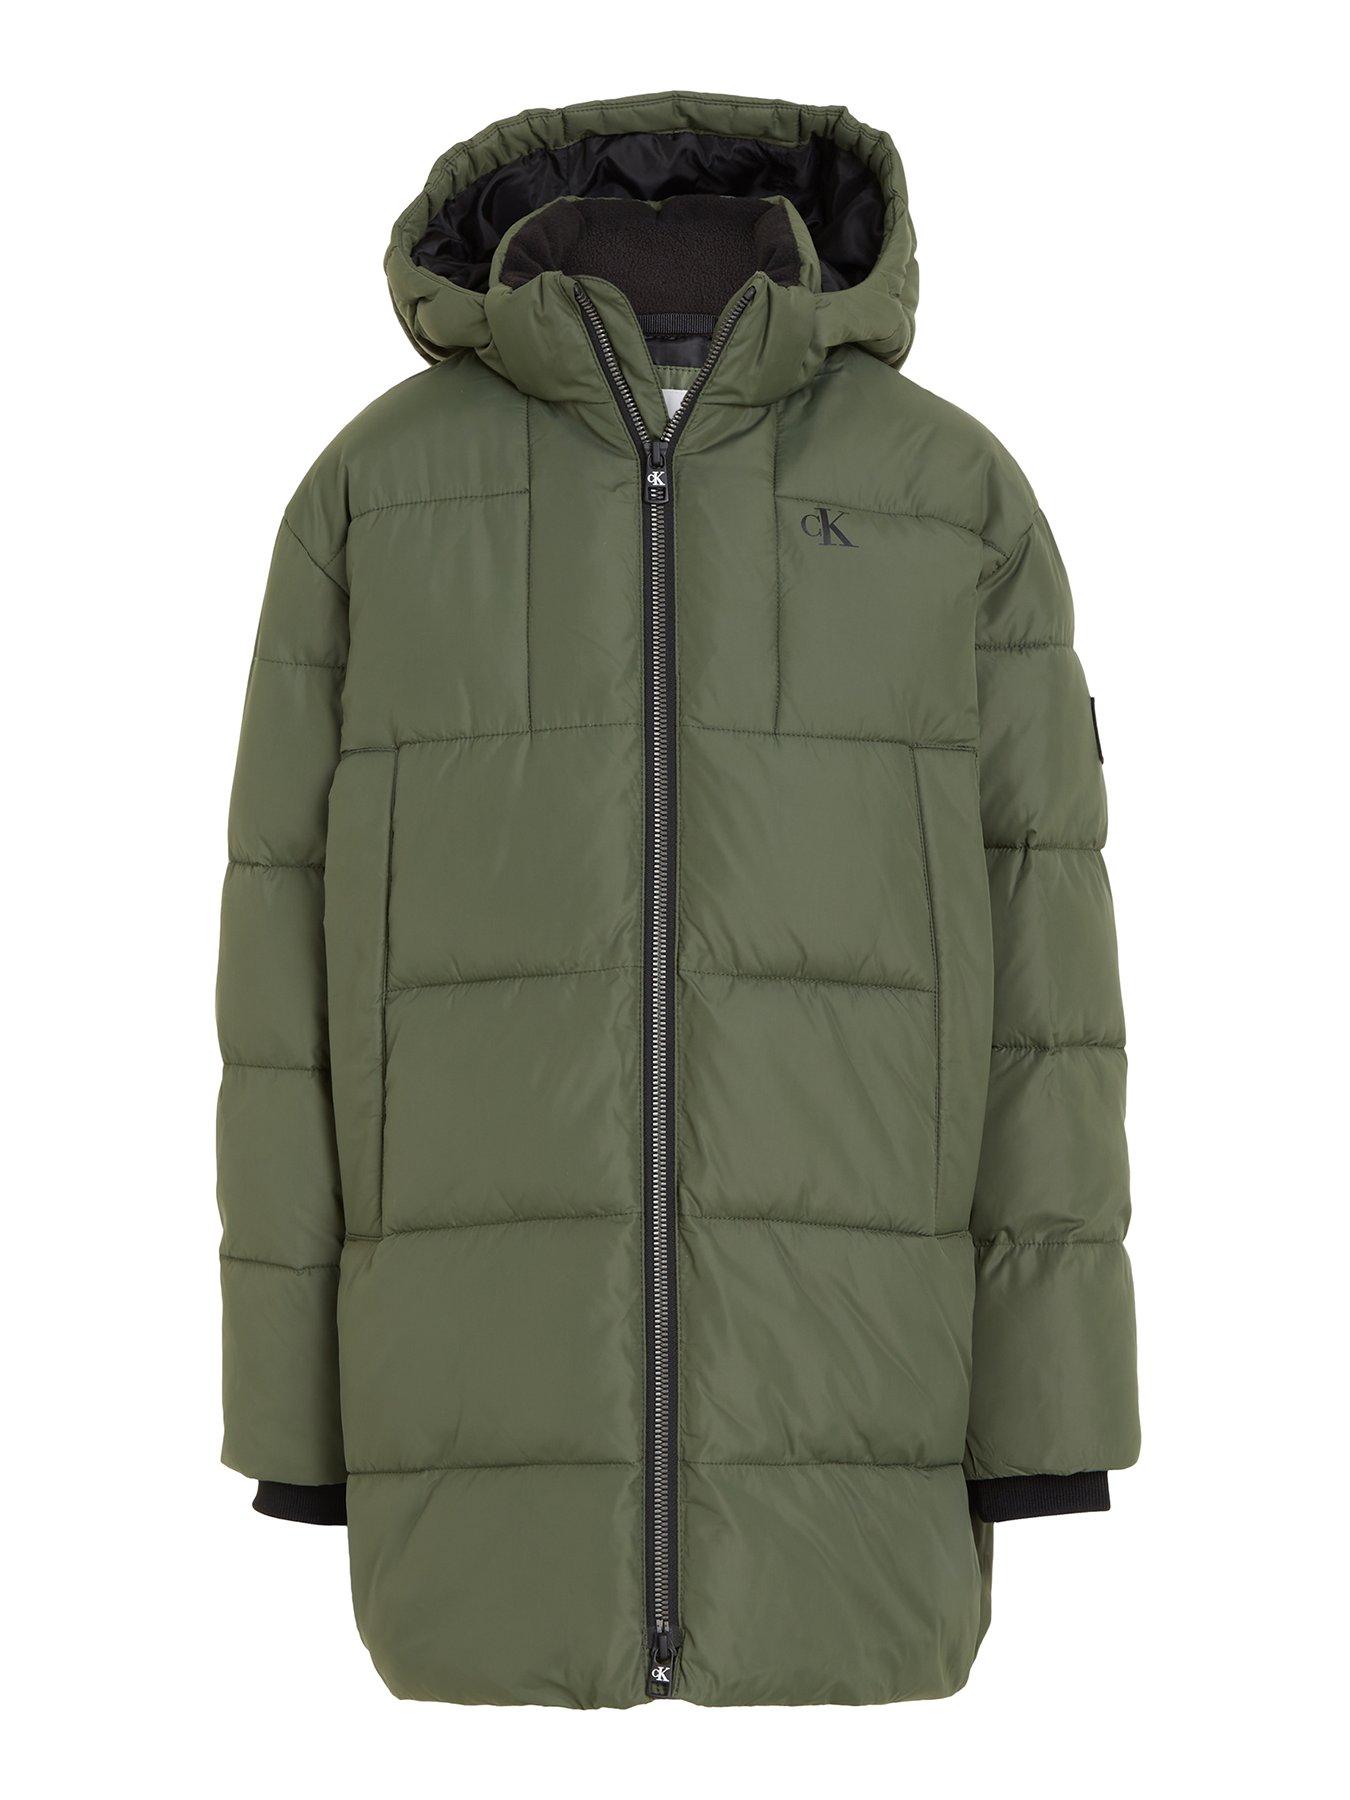 Calvin Klein Jeans Boys Essential Padded Parka - Thyme, Green, Size Age: 10 Years